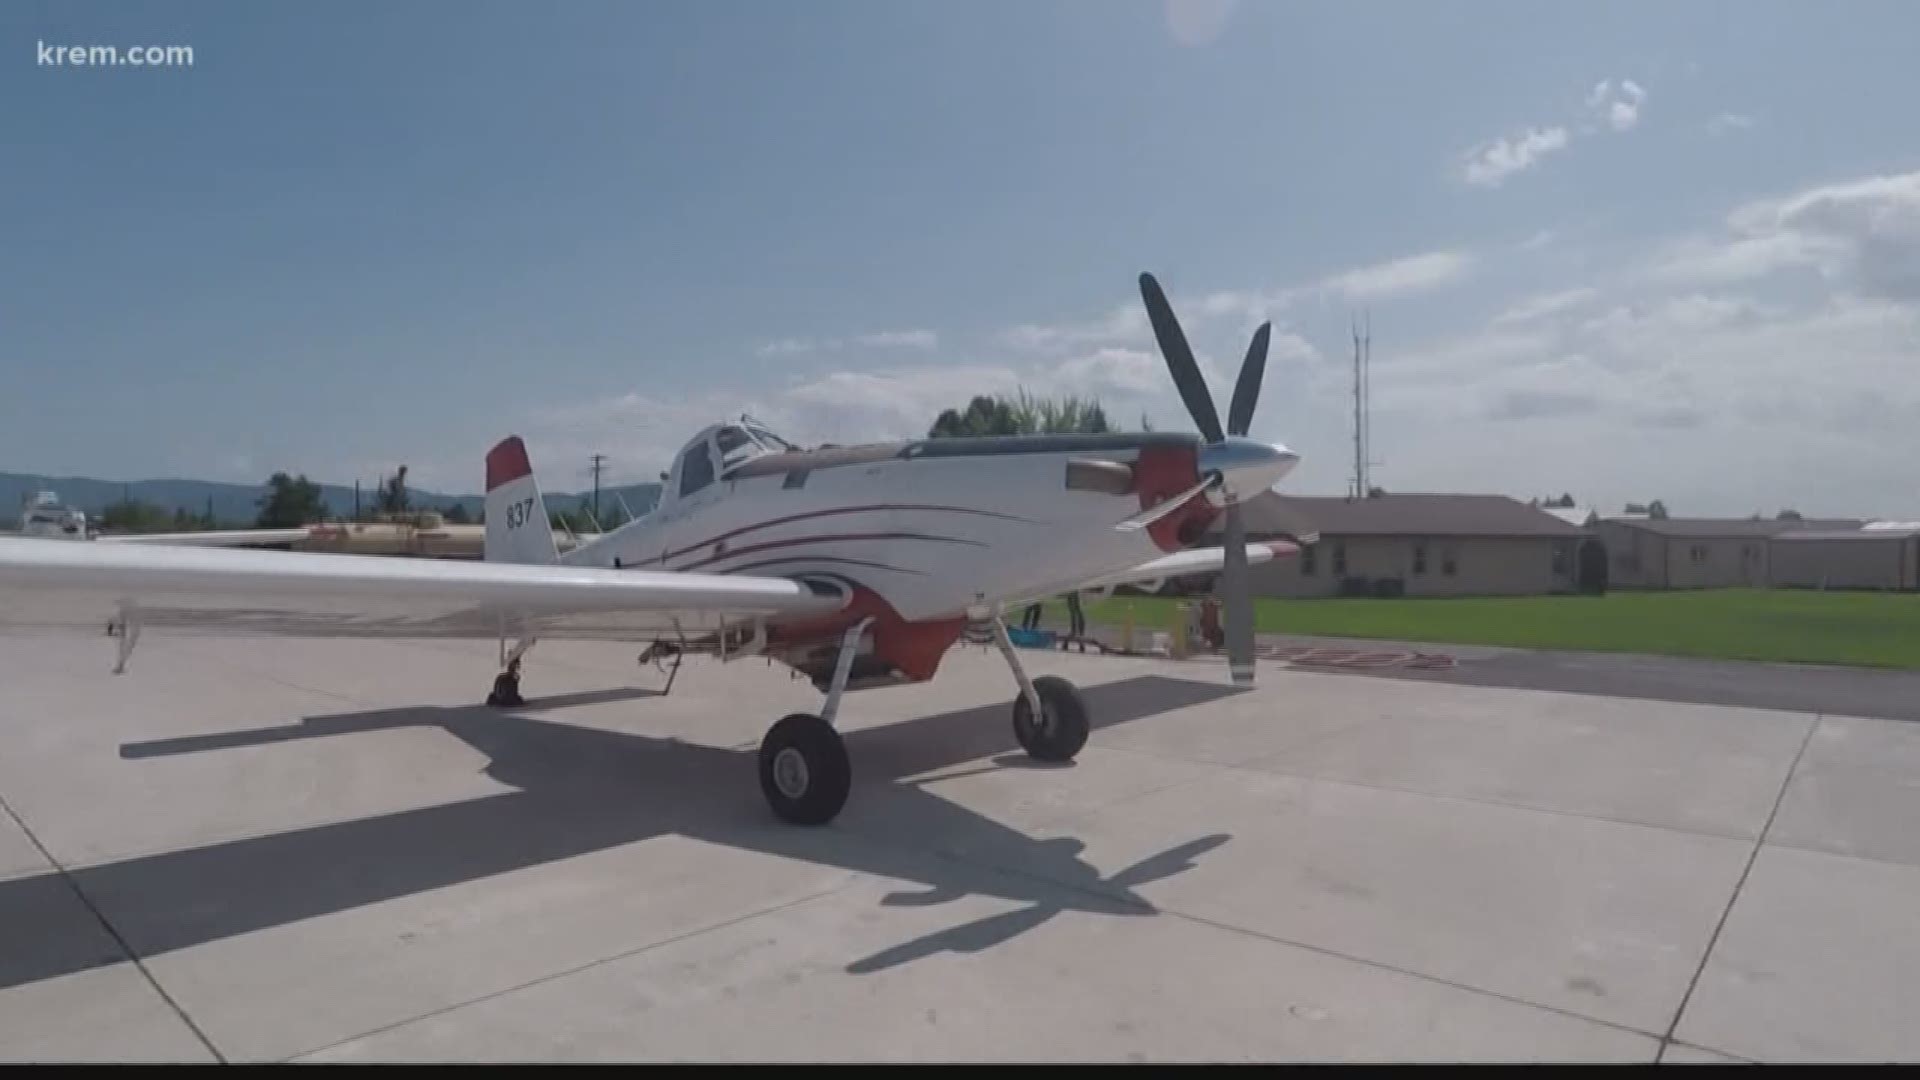 KREM's Taylor Viydo takes a closer look at the air tankers that help fight wildfires throughout the Inland Northwest.